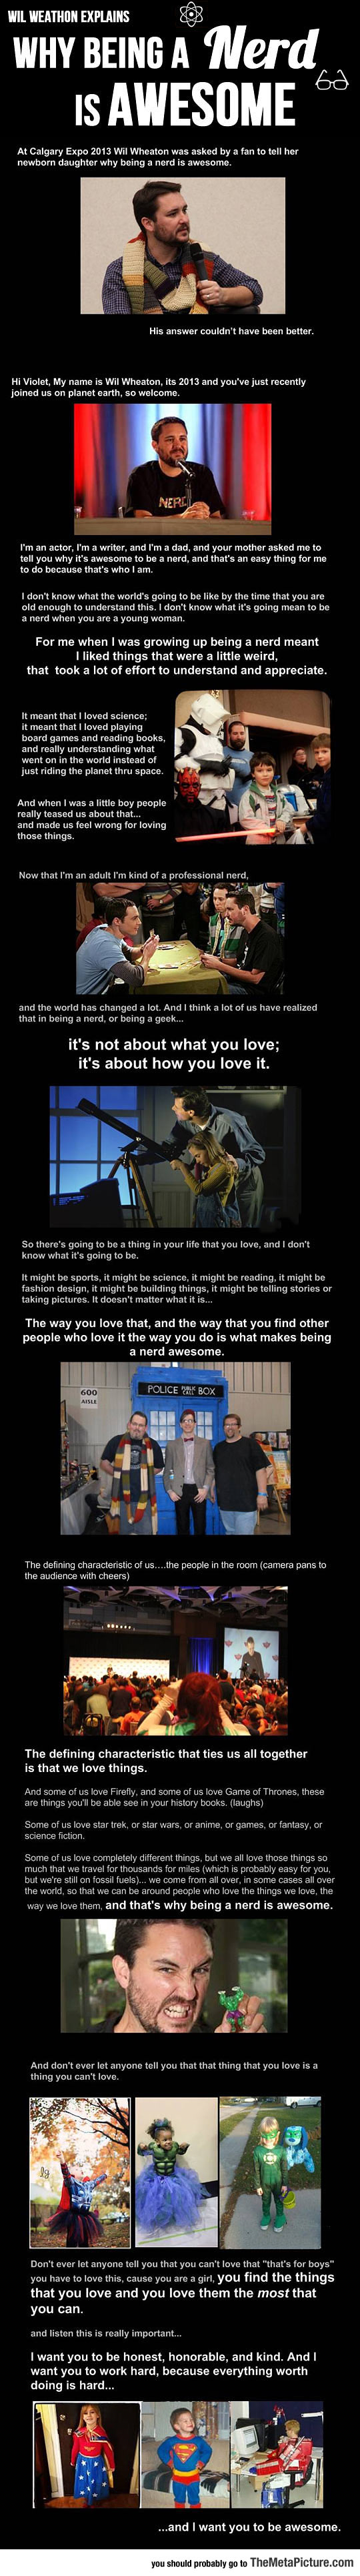 Why Being A Nerd Is Awesome